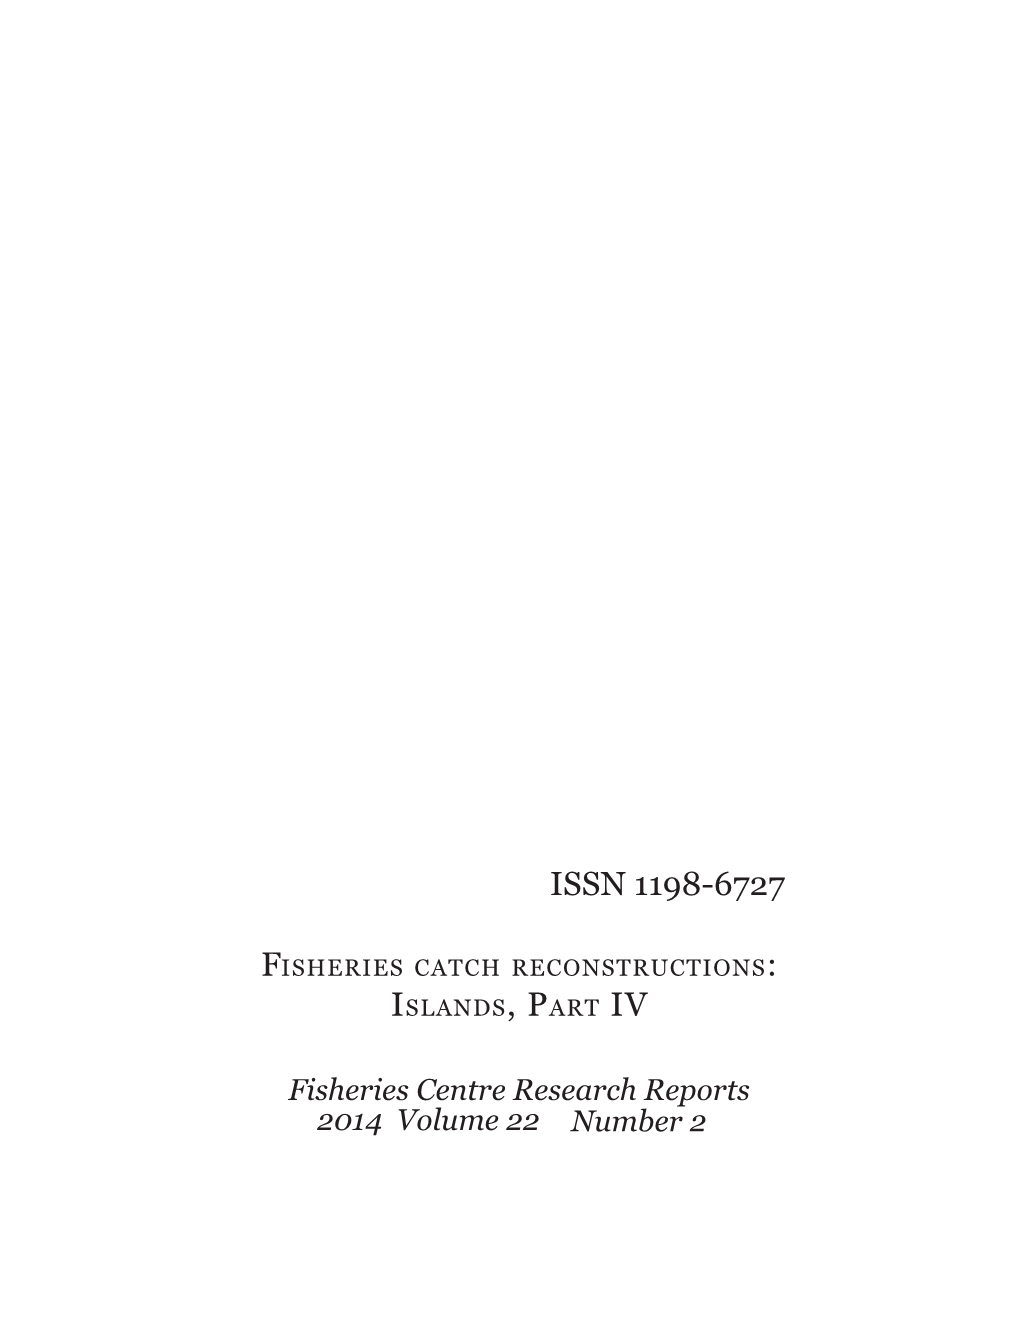 Number 2 2014 Volume 22 Fisheries Centre Research Reports